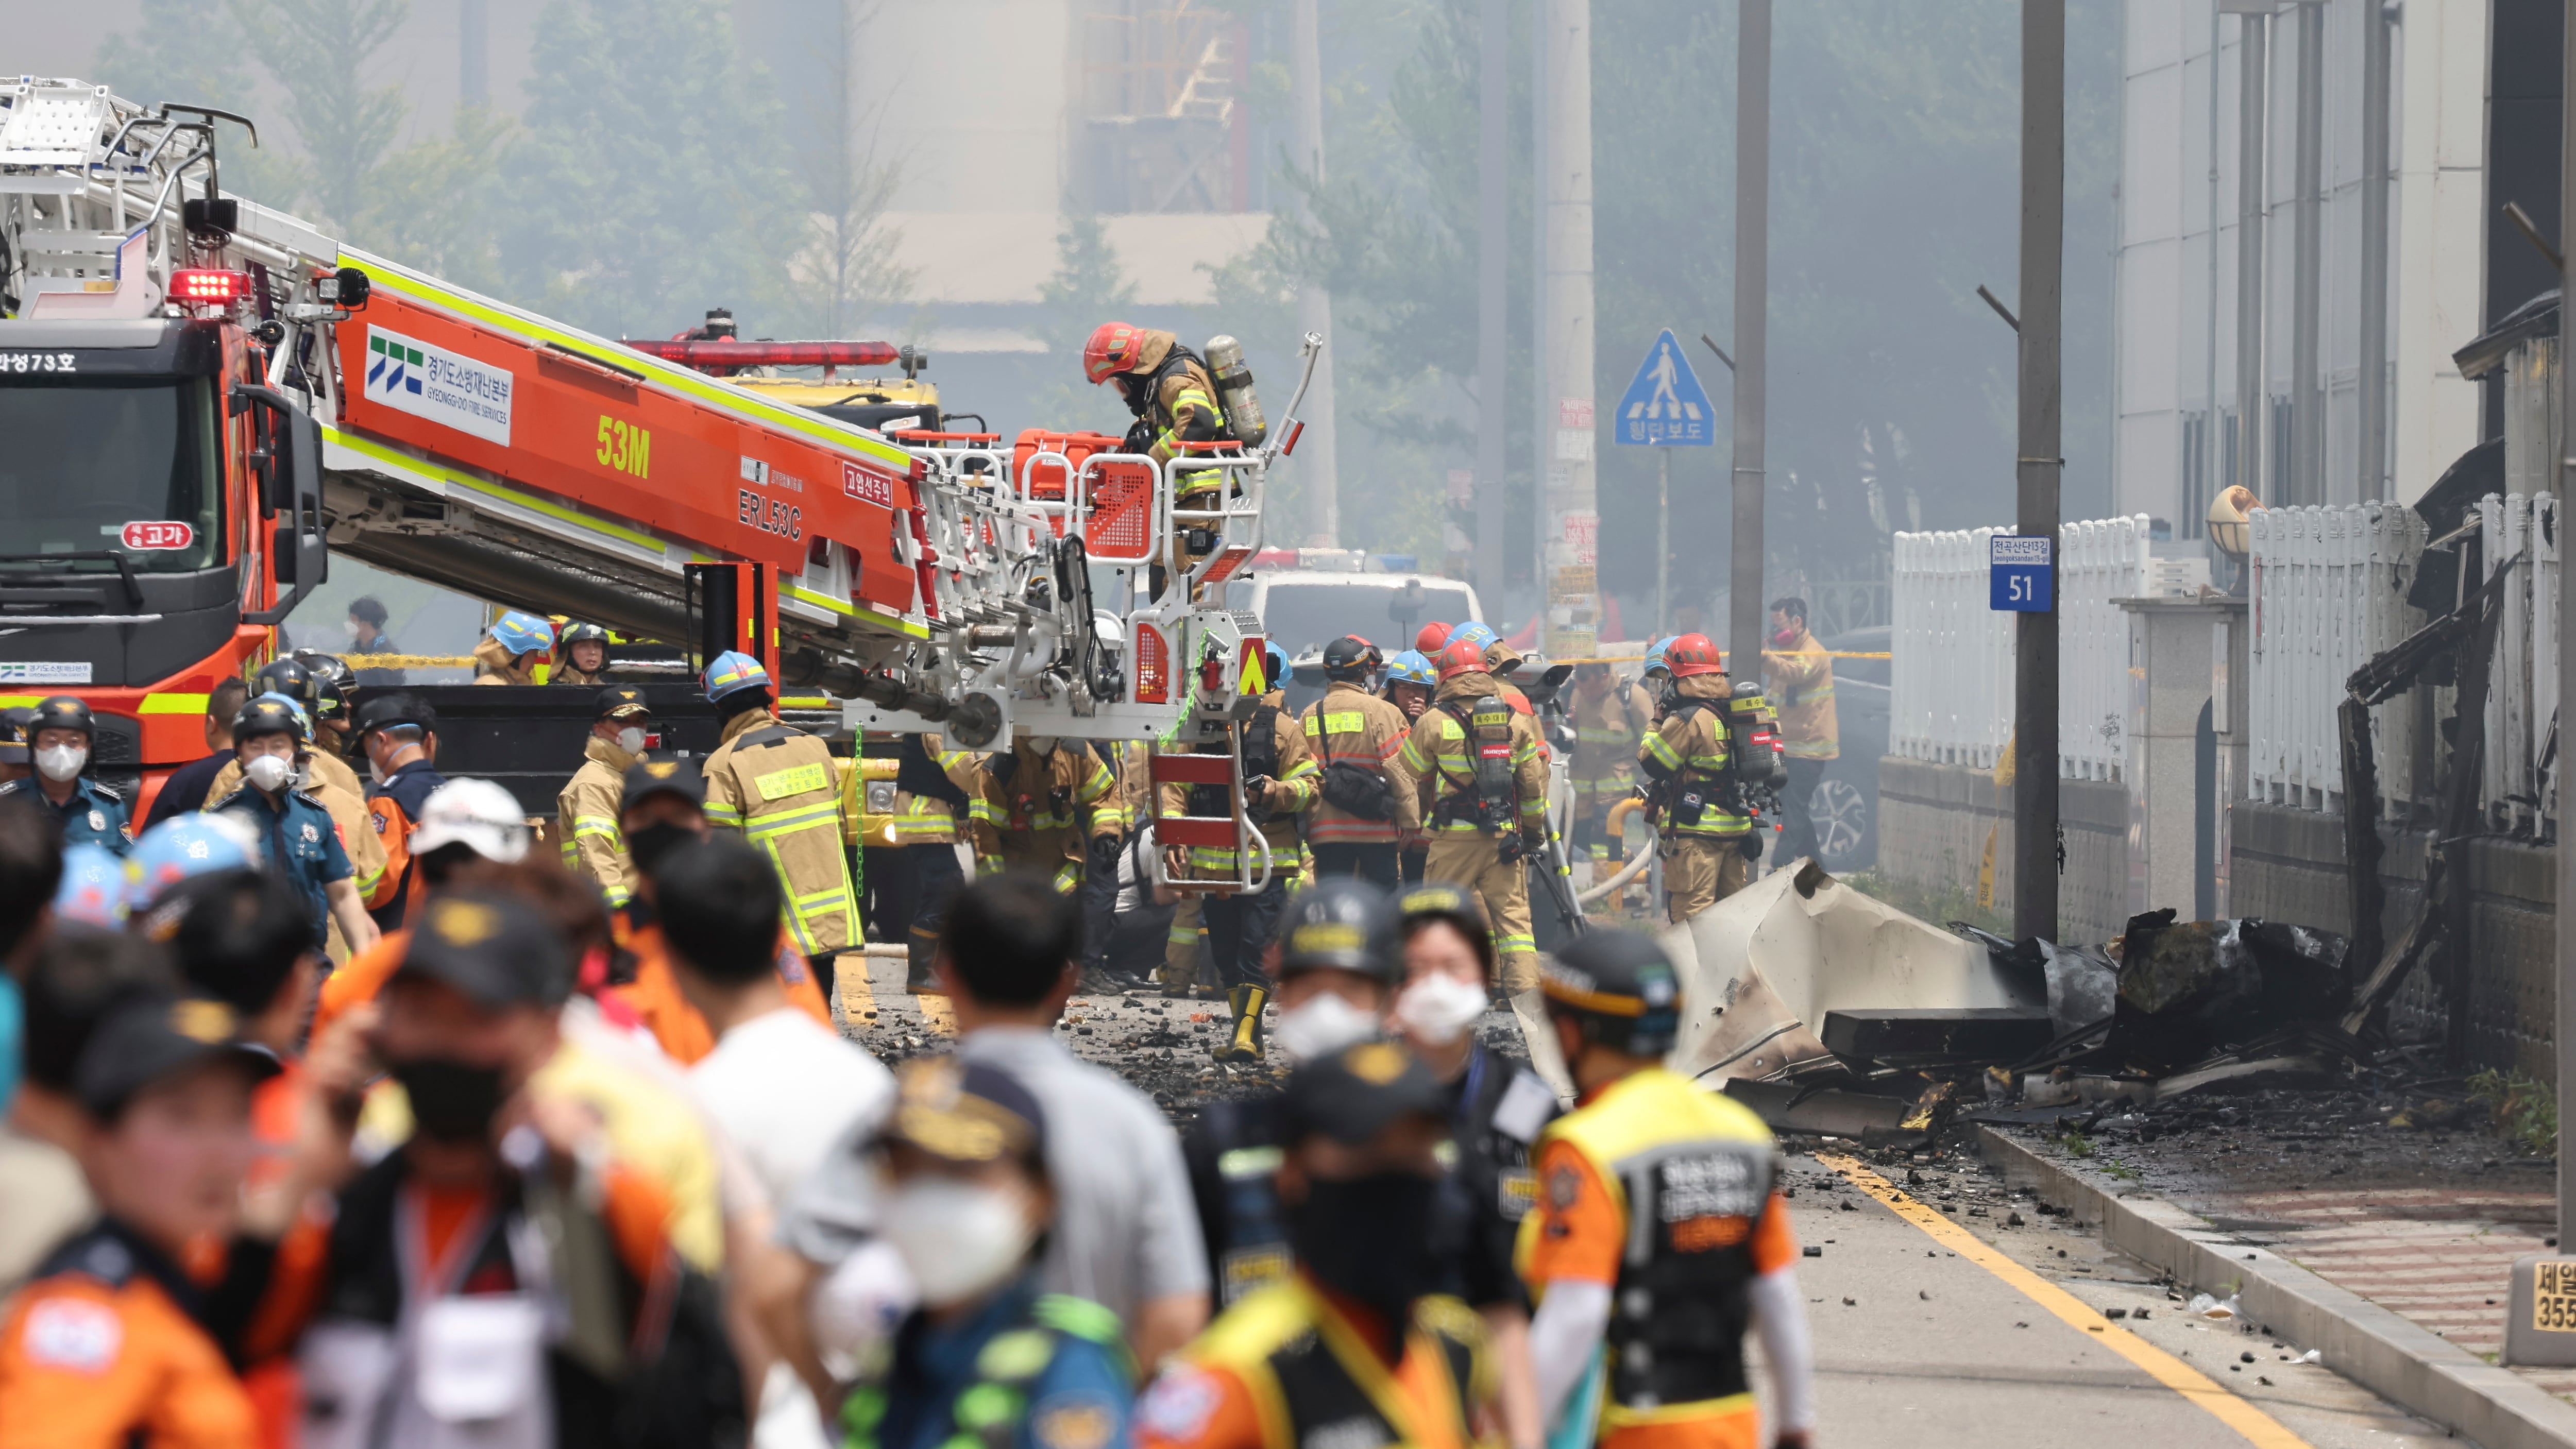 Several people are missing after the fire (Yonhap via AP)